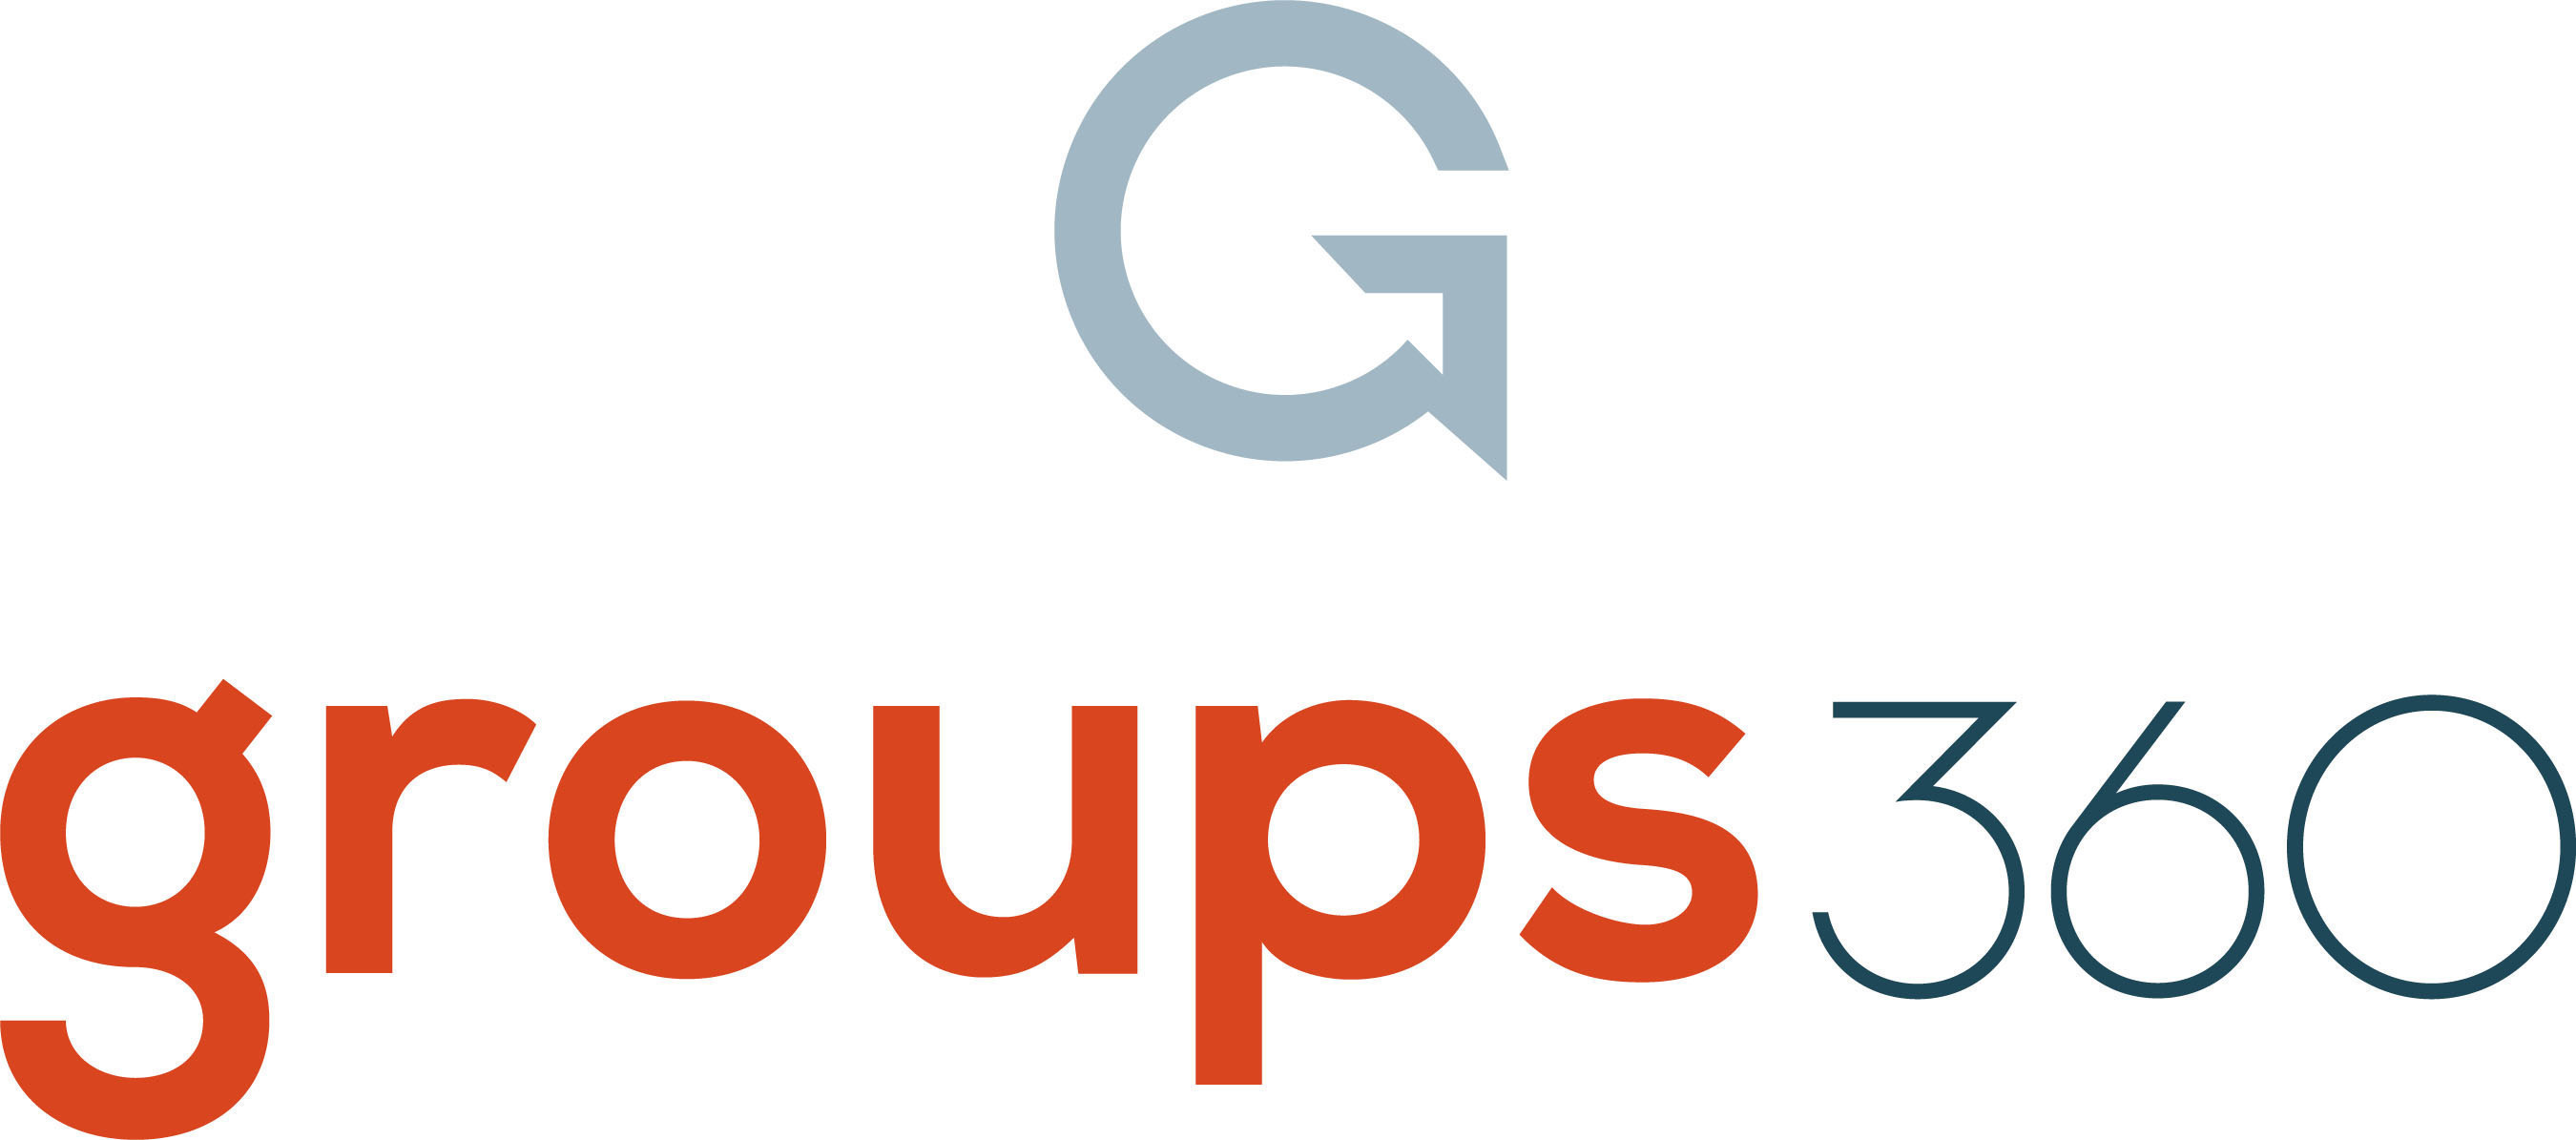 Groups360 is headquartered in Nashville, Tennessee.